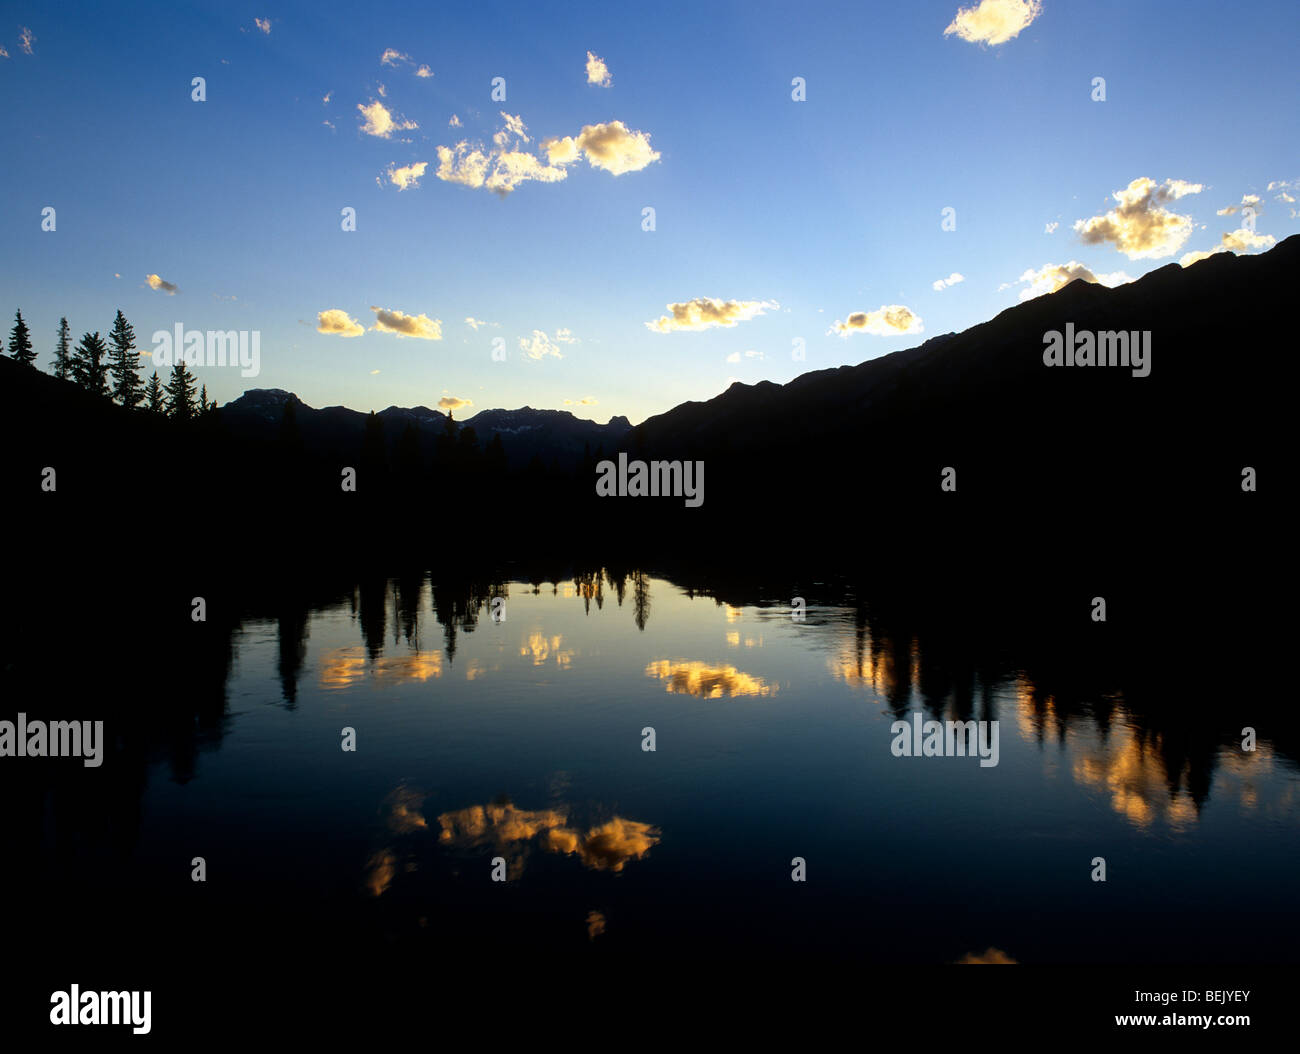 Sunset in the Rockies. Bow River. Trees silhouetted. Reflections. Banff National Park. BANFF. ALBERTA. CANADA. Stock Photo